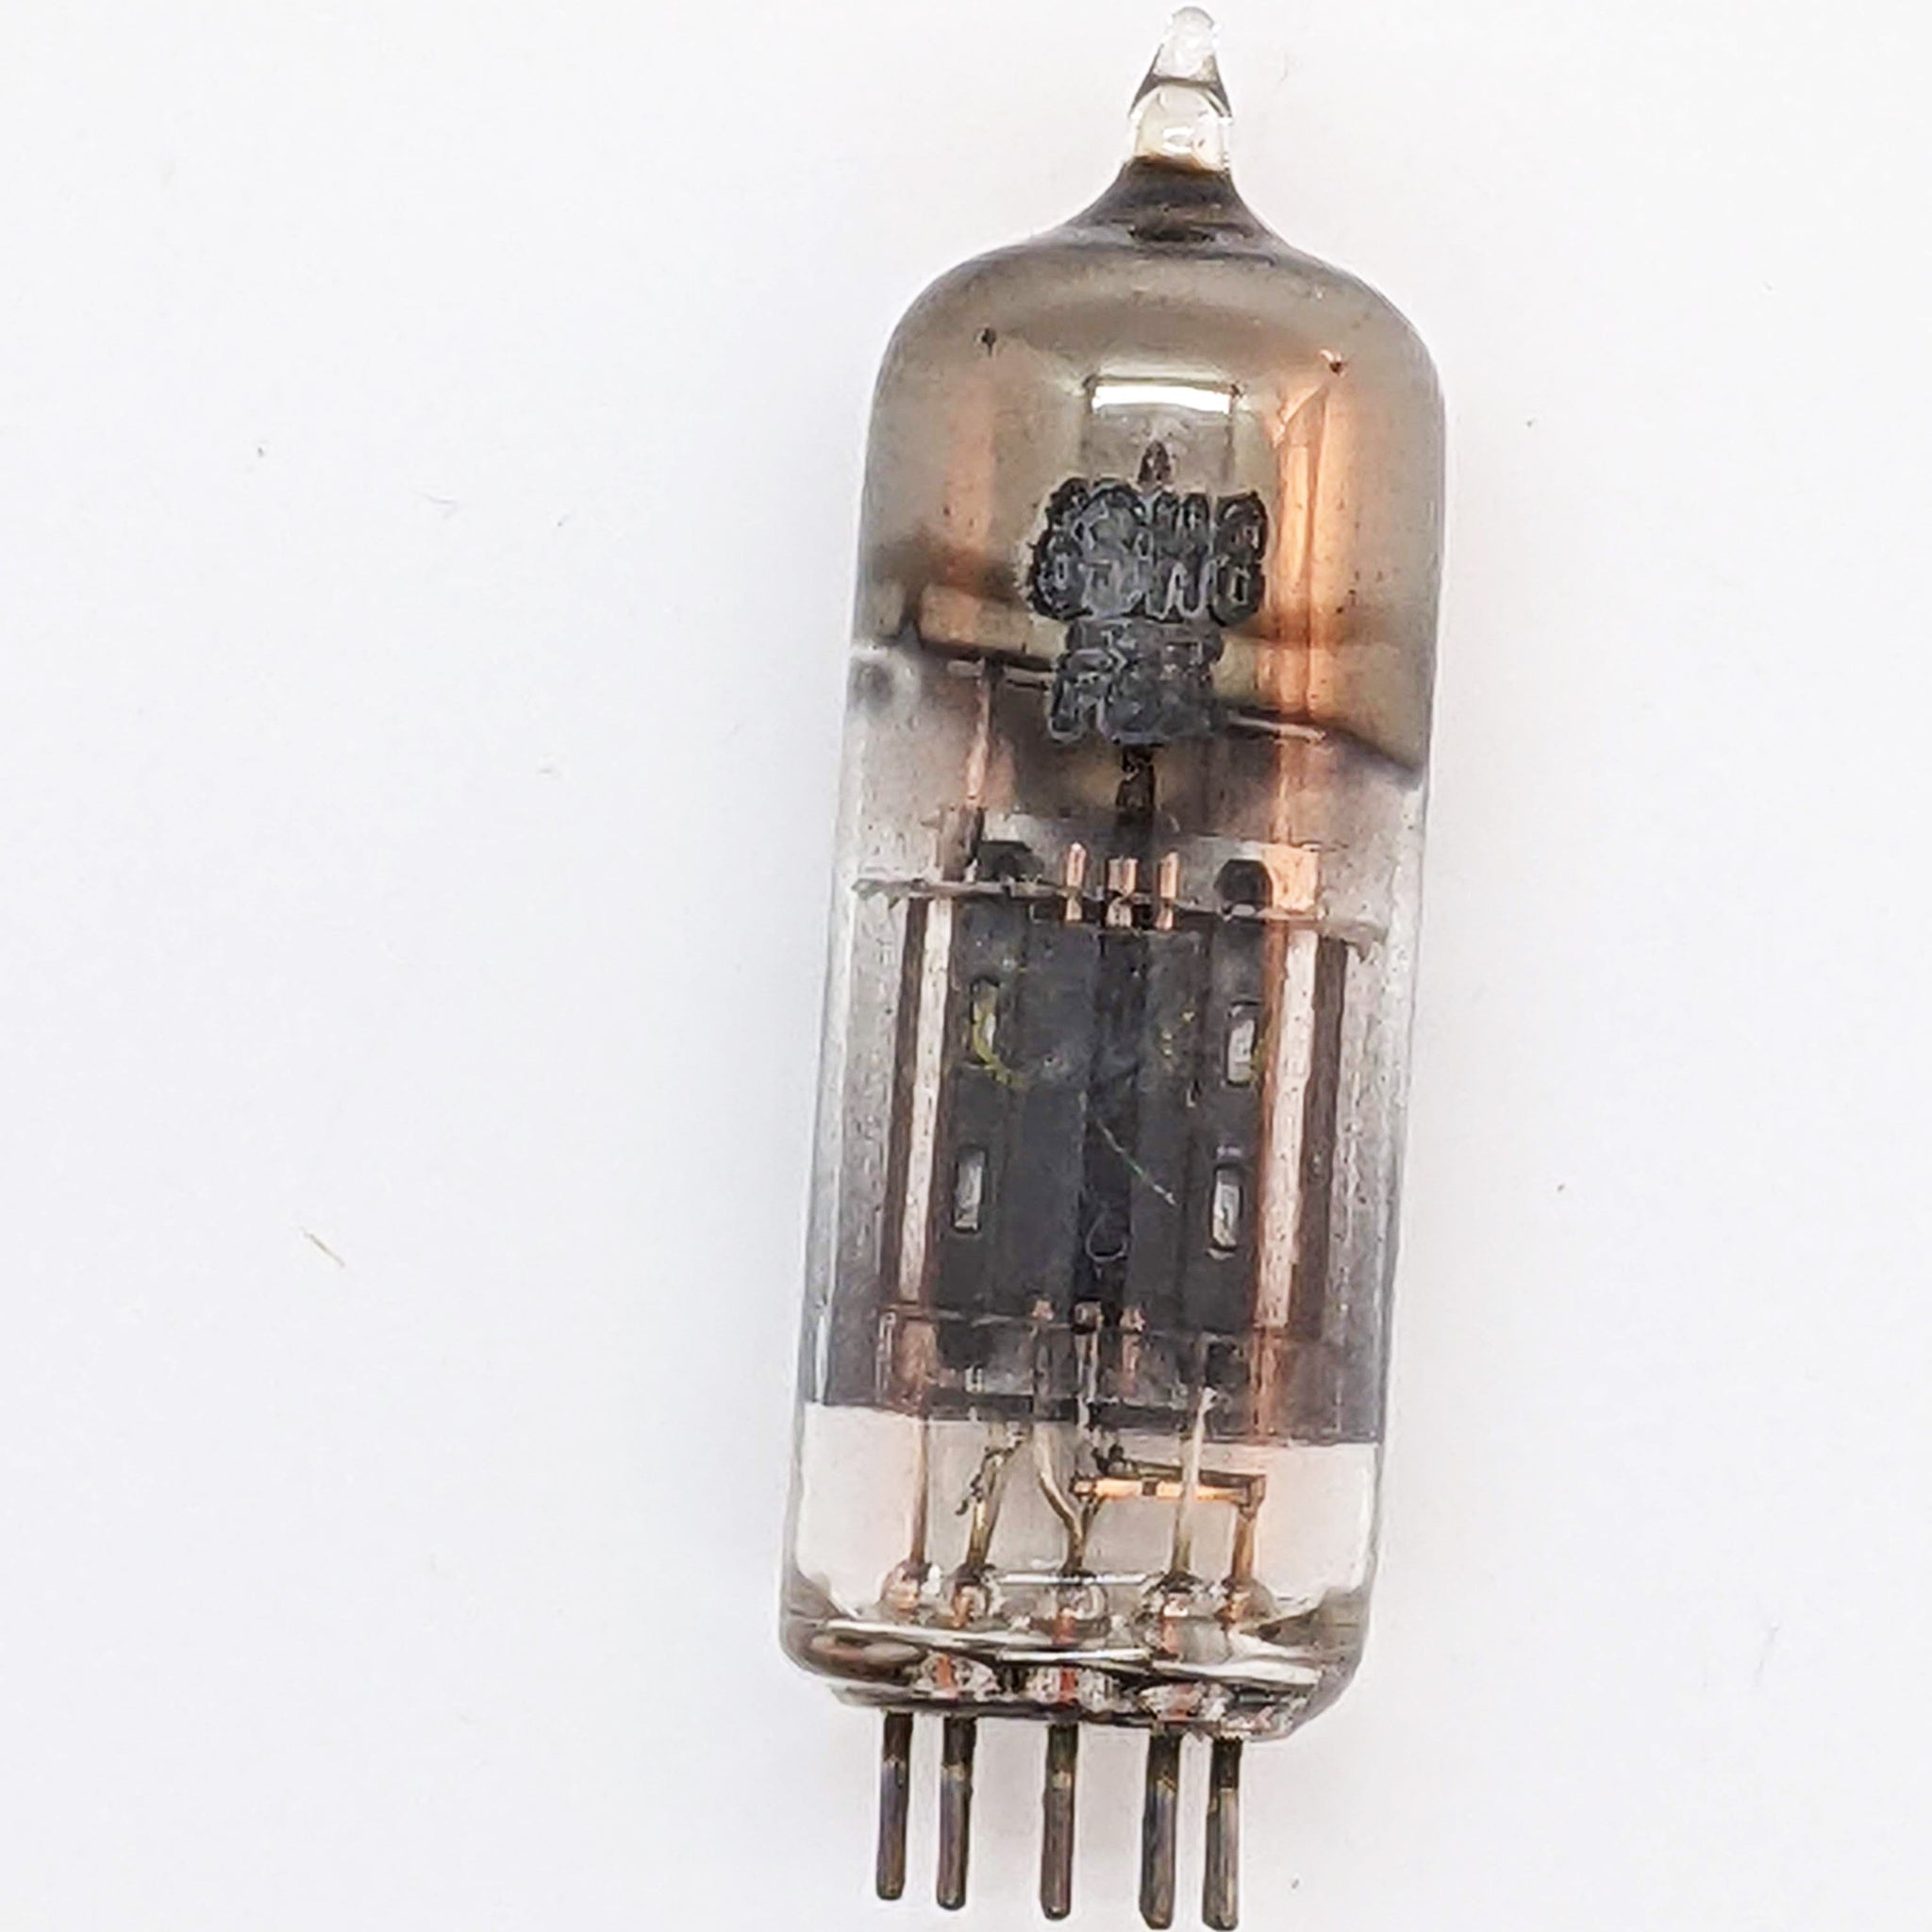 6BH8 Vacuum Tube, Tested Good, Ships Quick From Mississippi